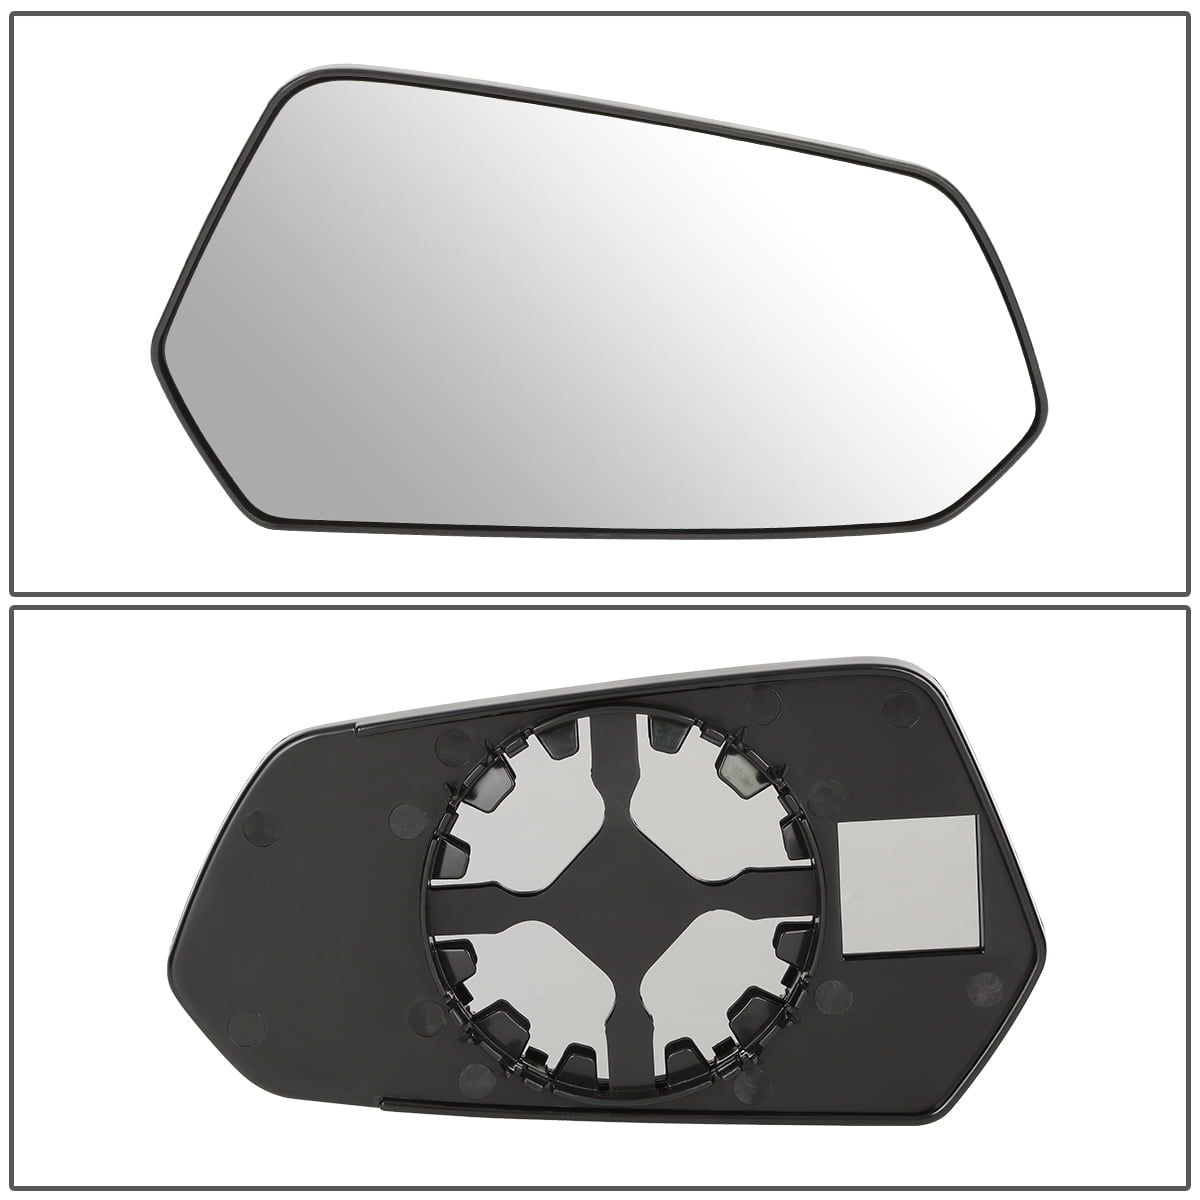 DNA Motoring OEM-MG-0227 92235873 OE Style Passenger/Right Mirror Glass 